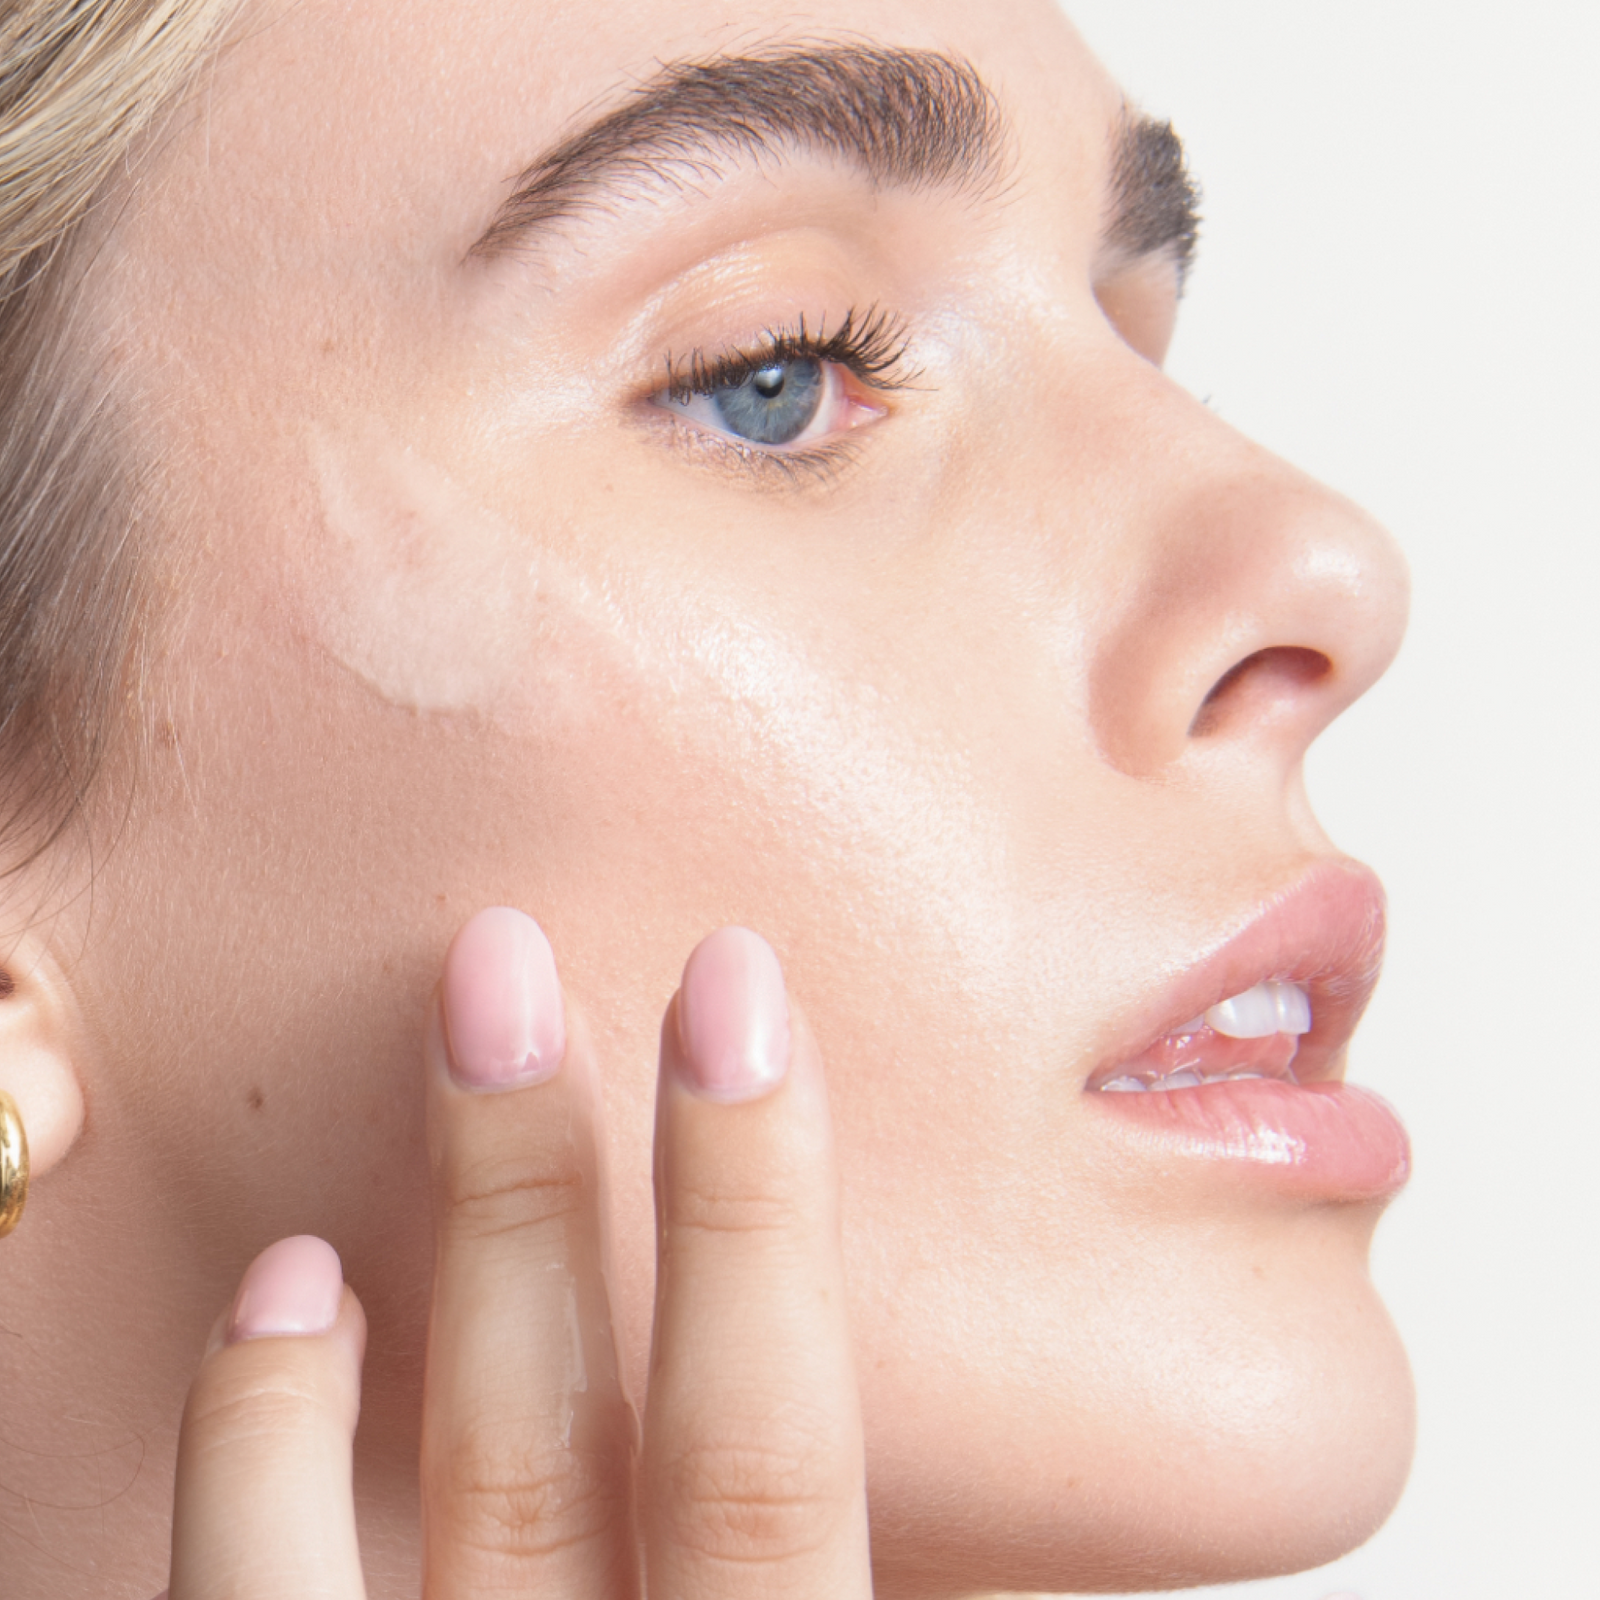 What Does Lactic Acid Do for Skin?